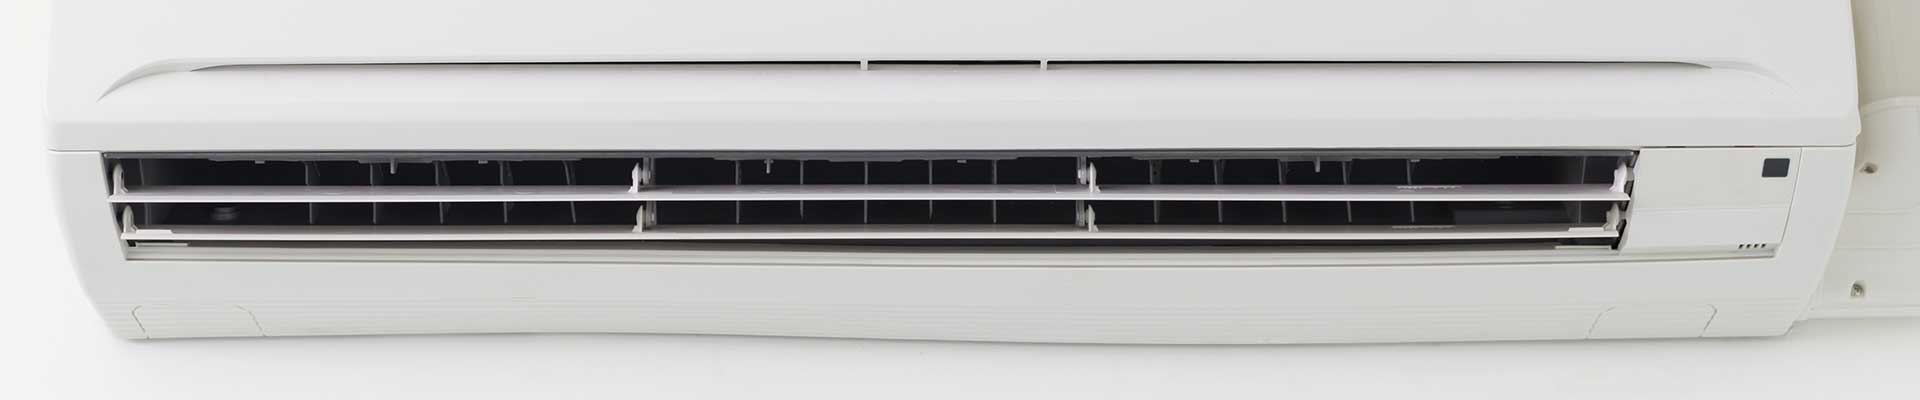 ductless mini air conditioner services